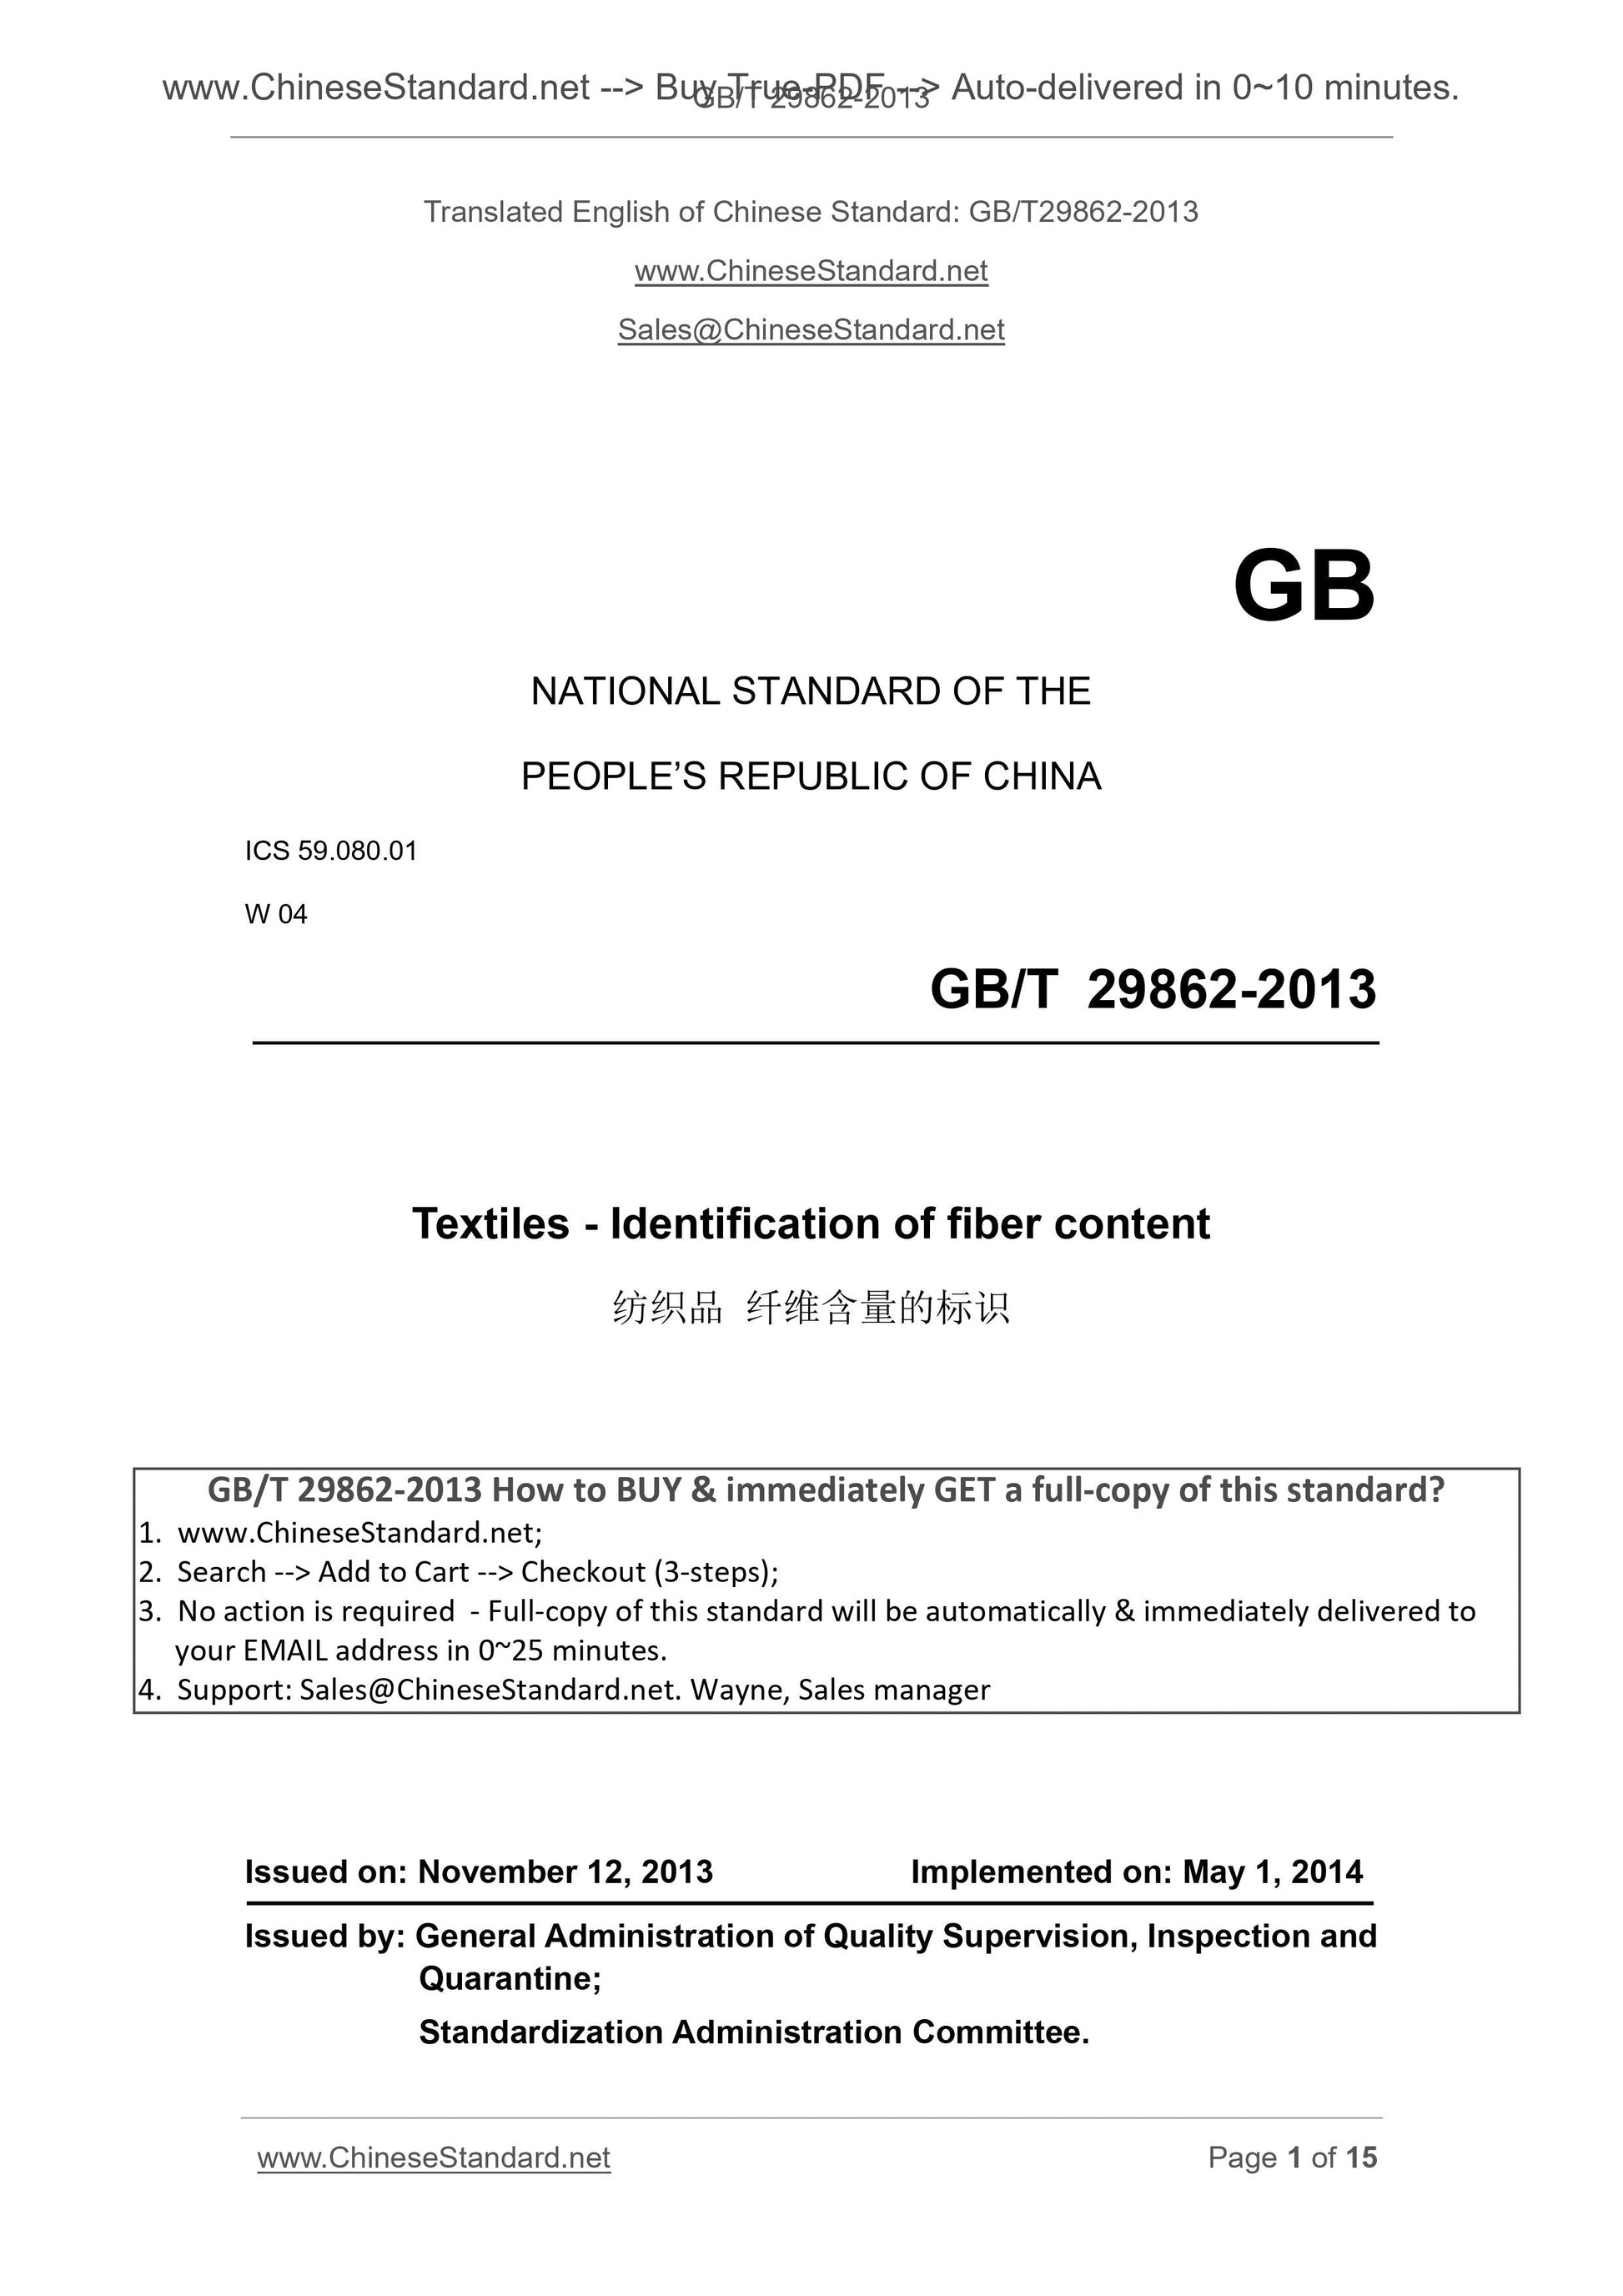 GB/T 29862-2013 Page 1